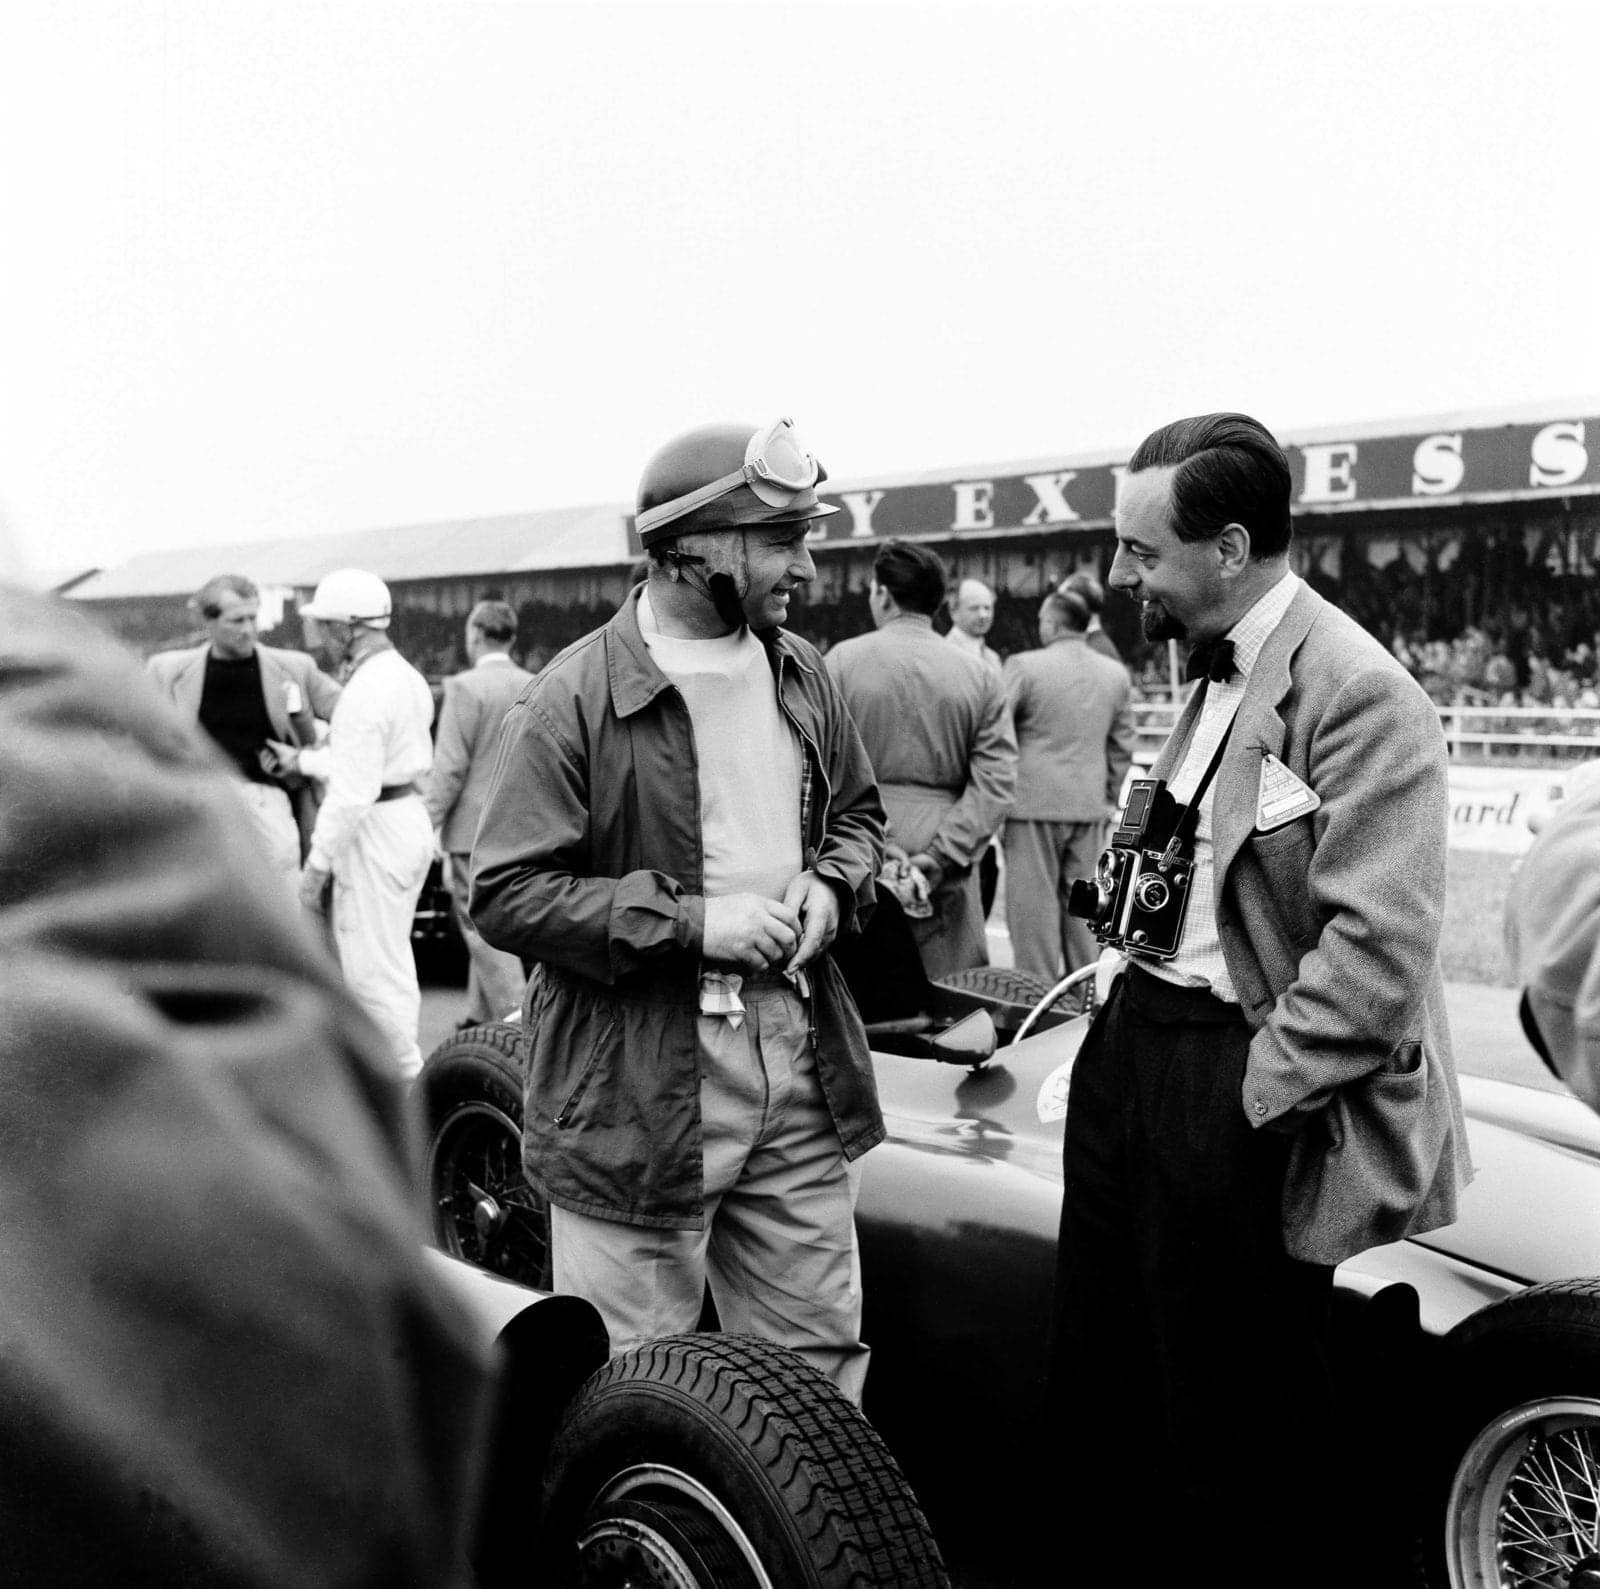 The British Grand Prix; Silverstone, July 14, 1956. Before the start of the race Juan Manuel Fangio, the best driver, chats with his friend Louis Klemantaski, the best motor racing photographer. Fangio went on to win. (Photo by Klemantaski Collection/Getty Images)